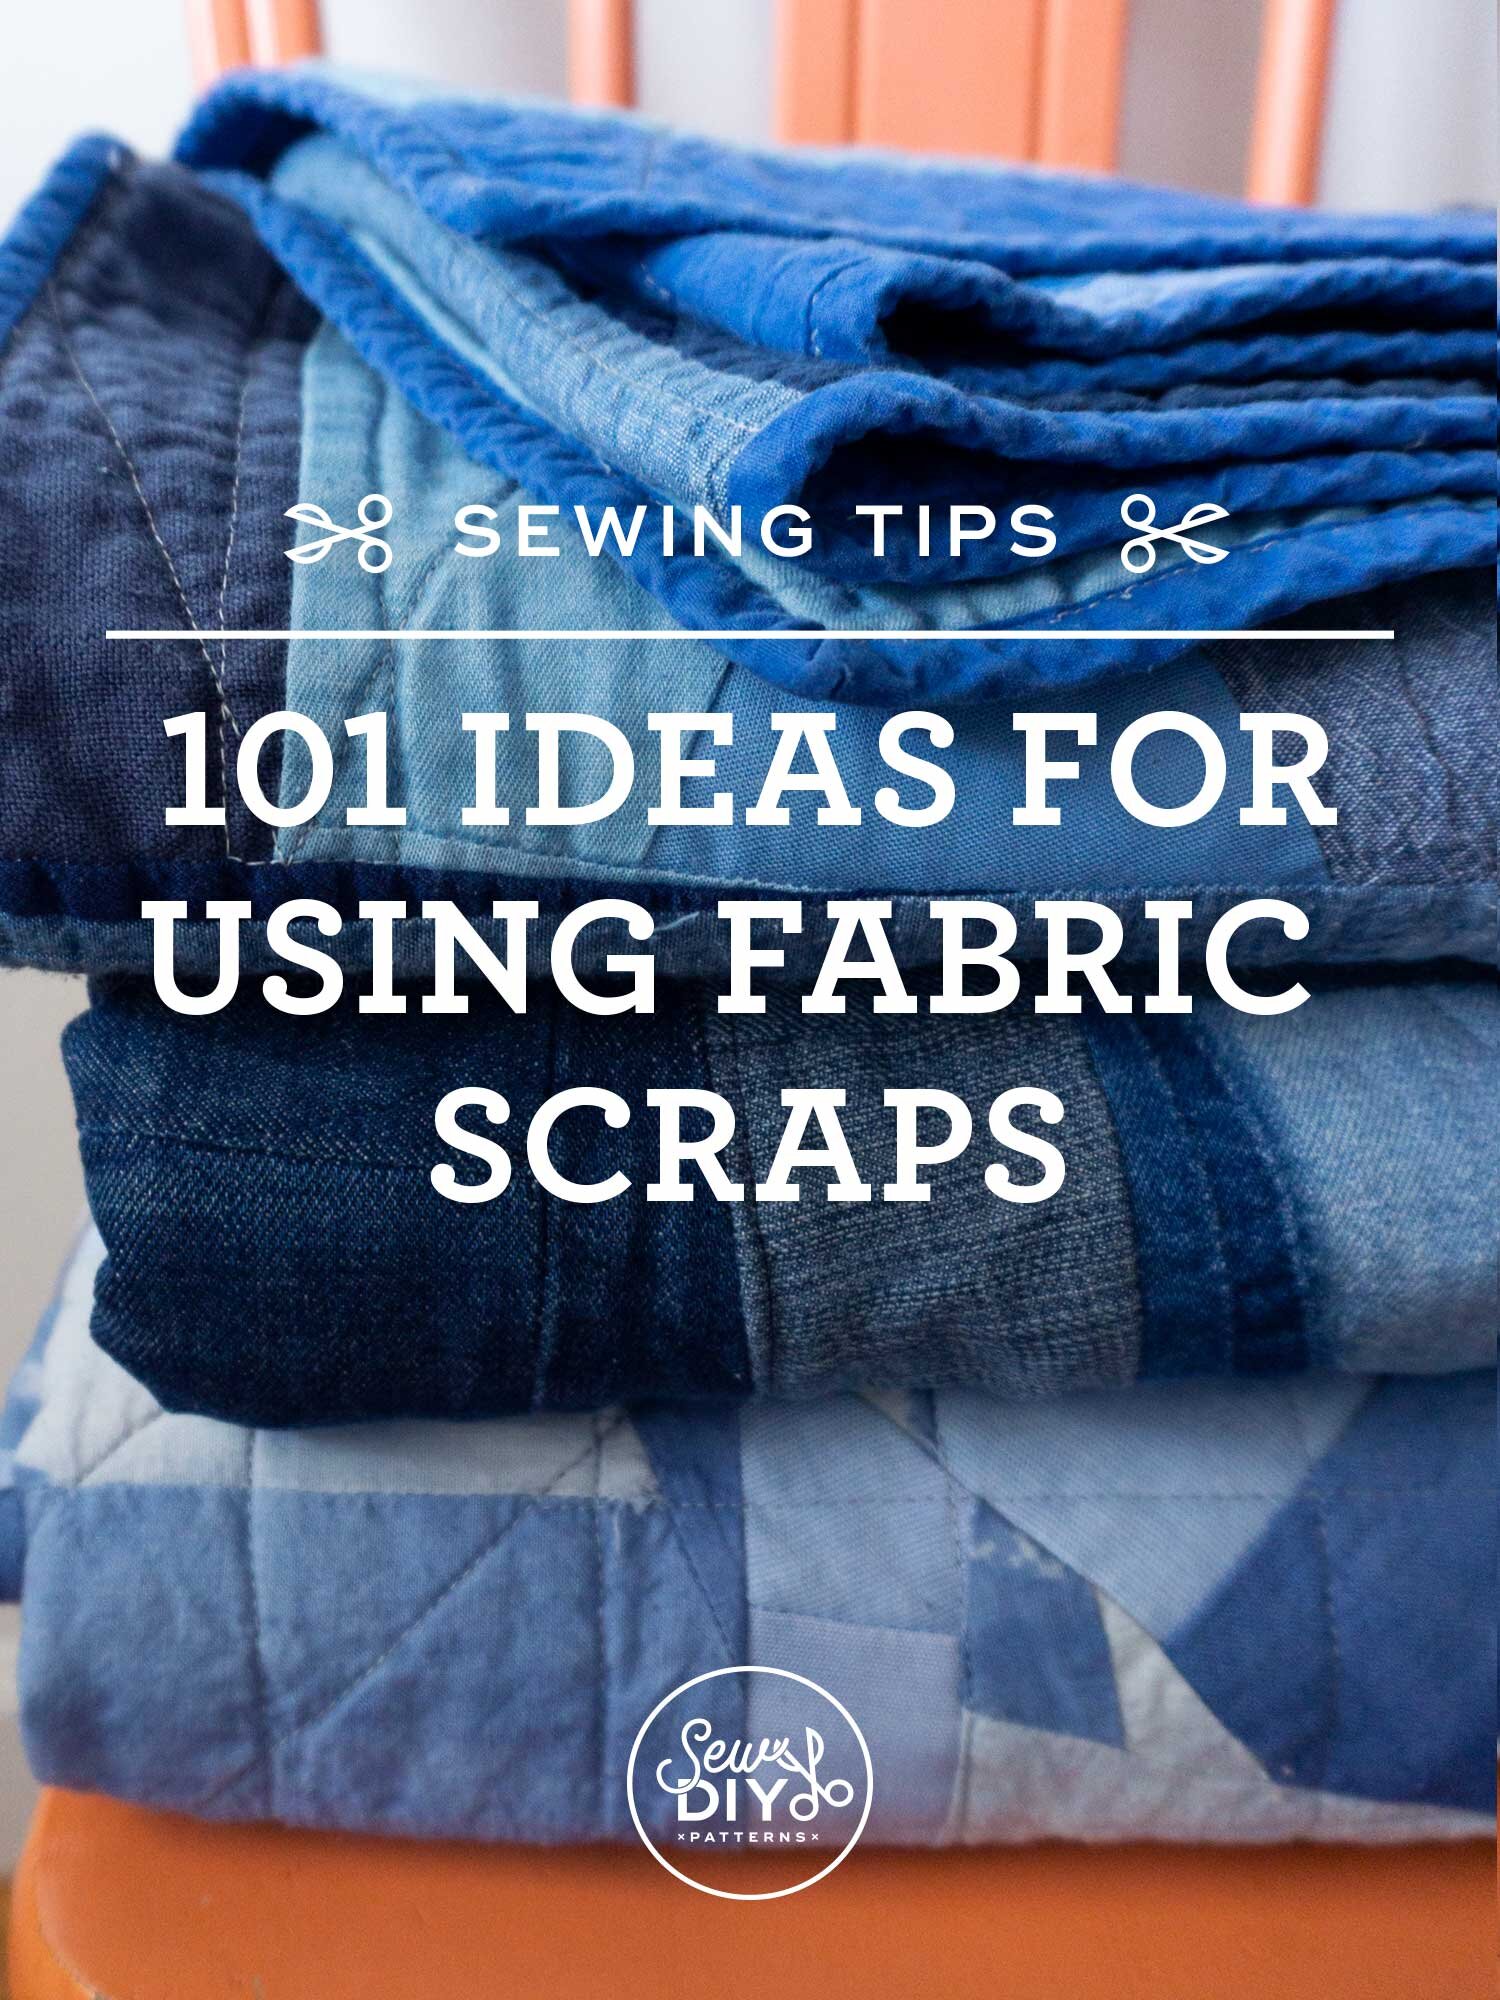 DIY Tutorial: Cleaning Up Your Fabric Stash